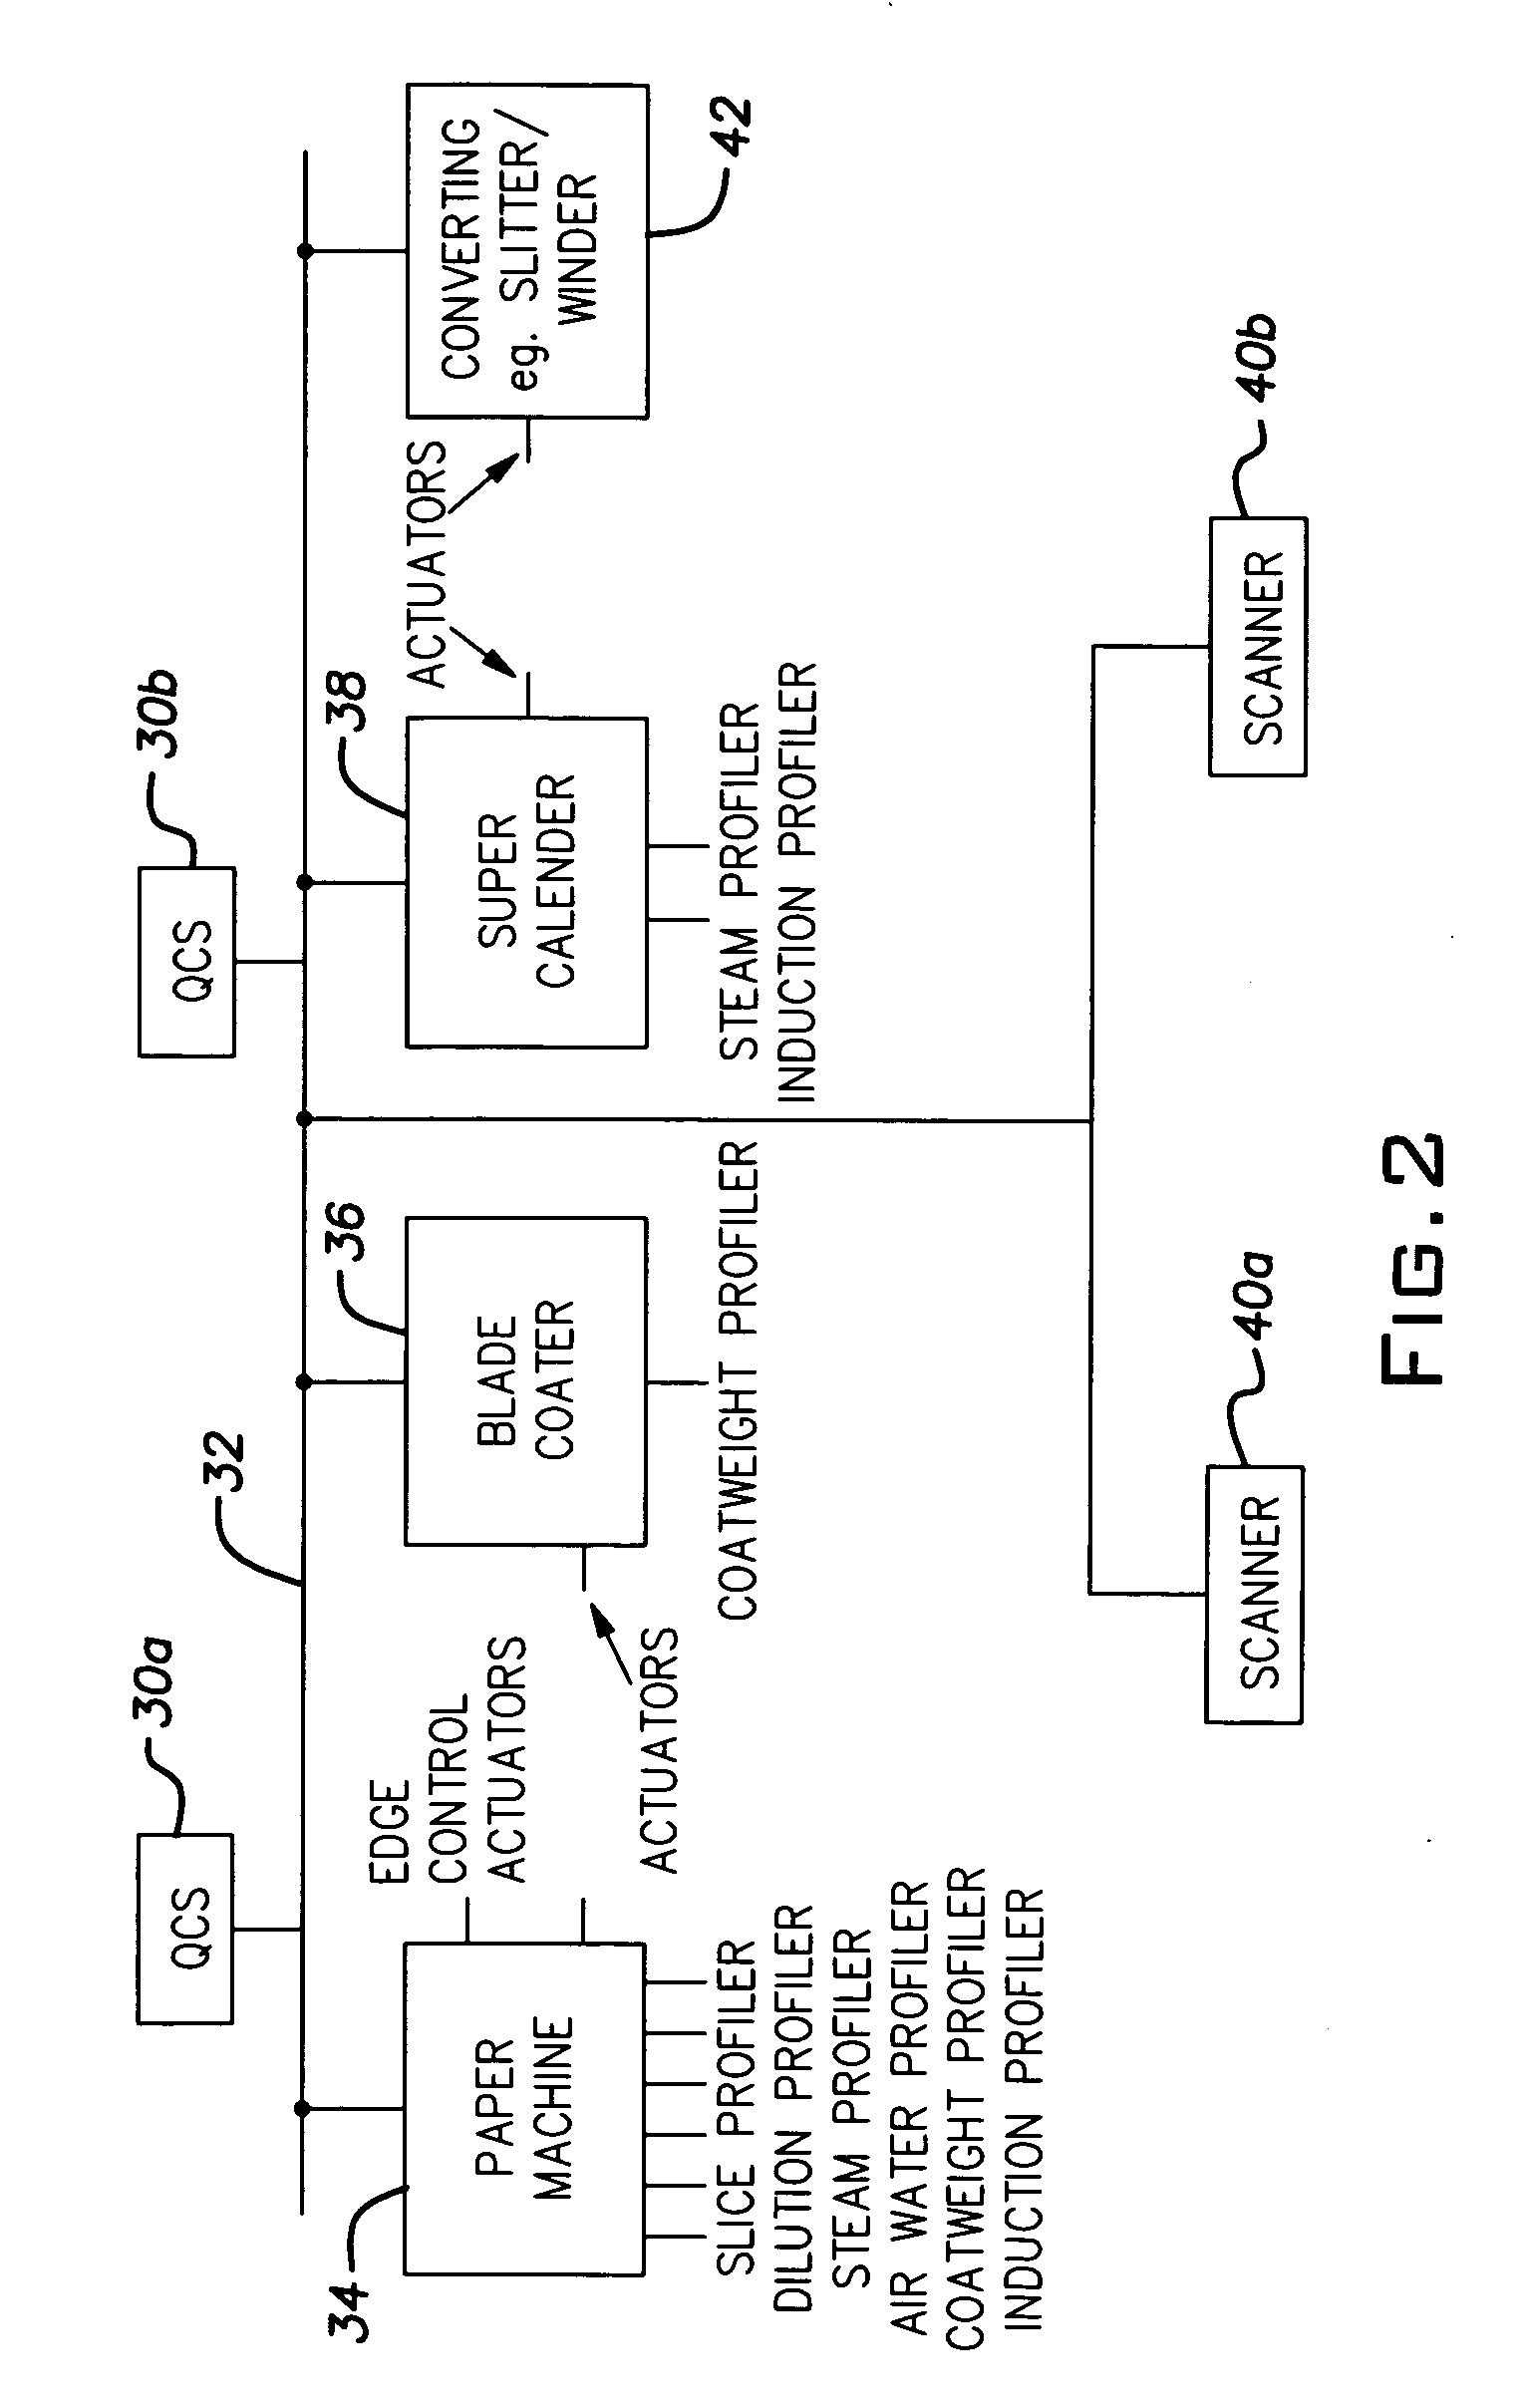 Actuator system for use in control of a sheet or web forming process